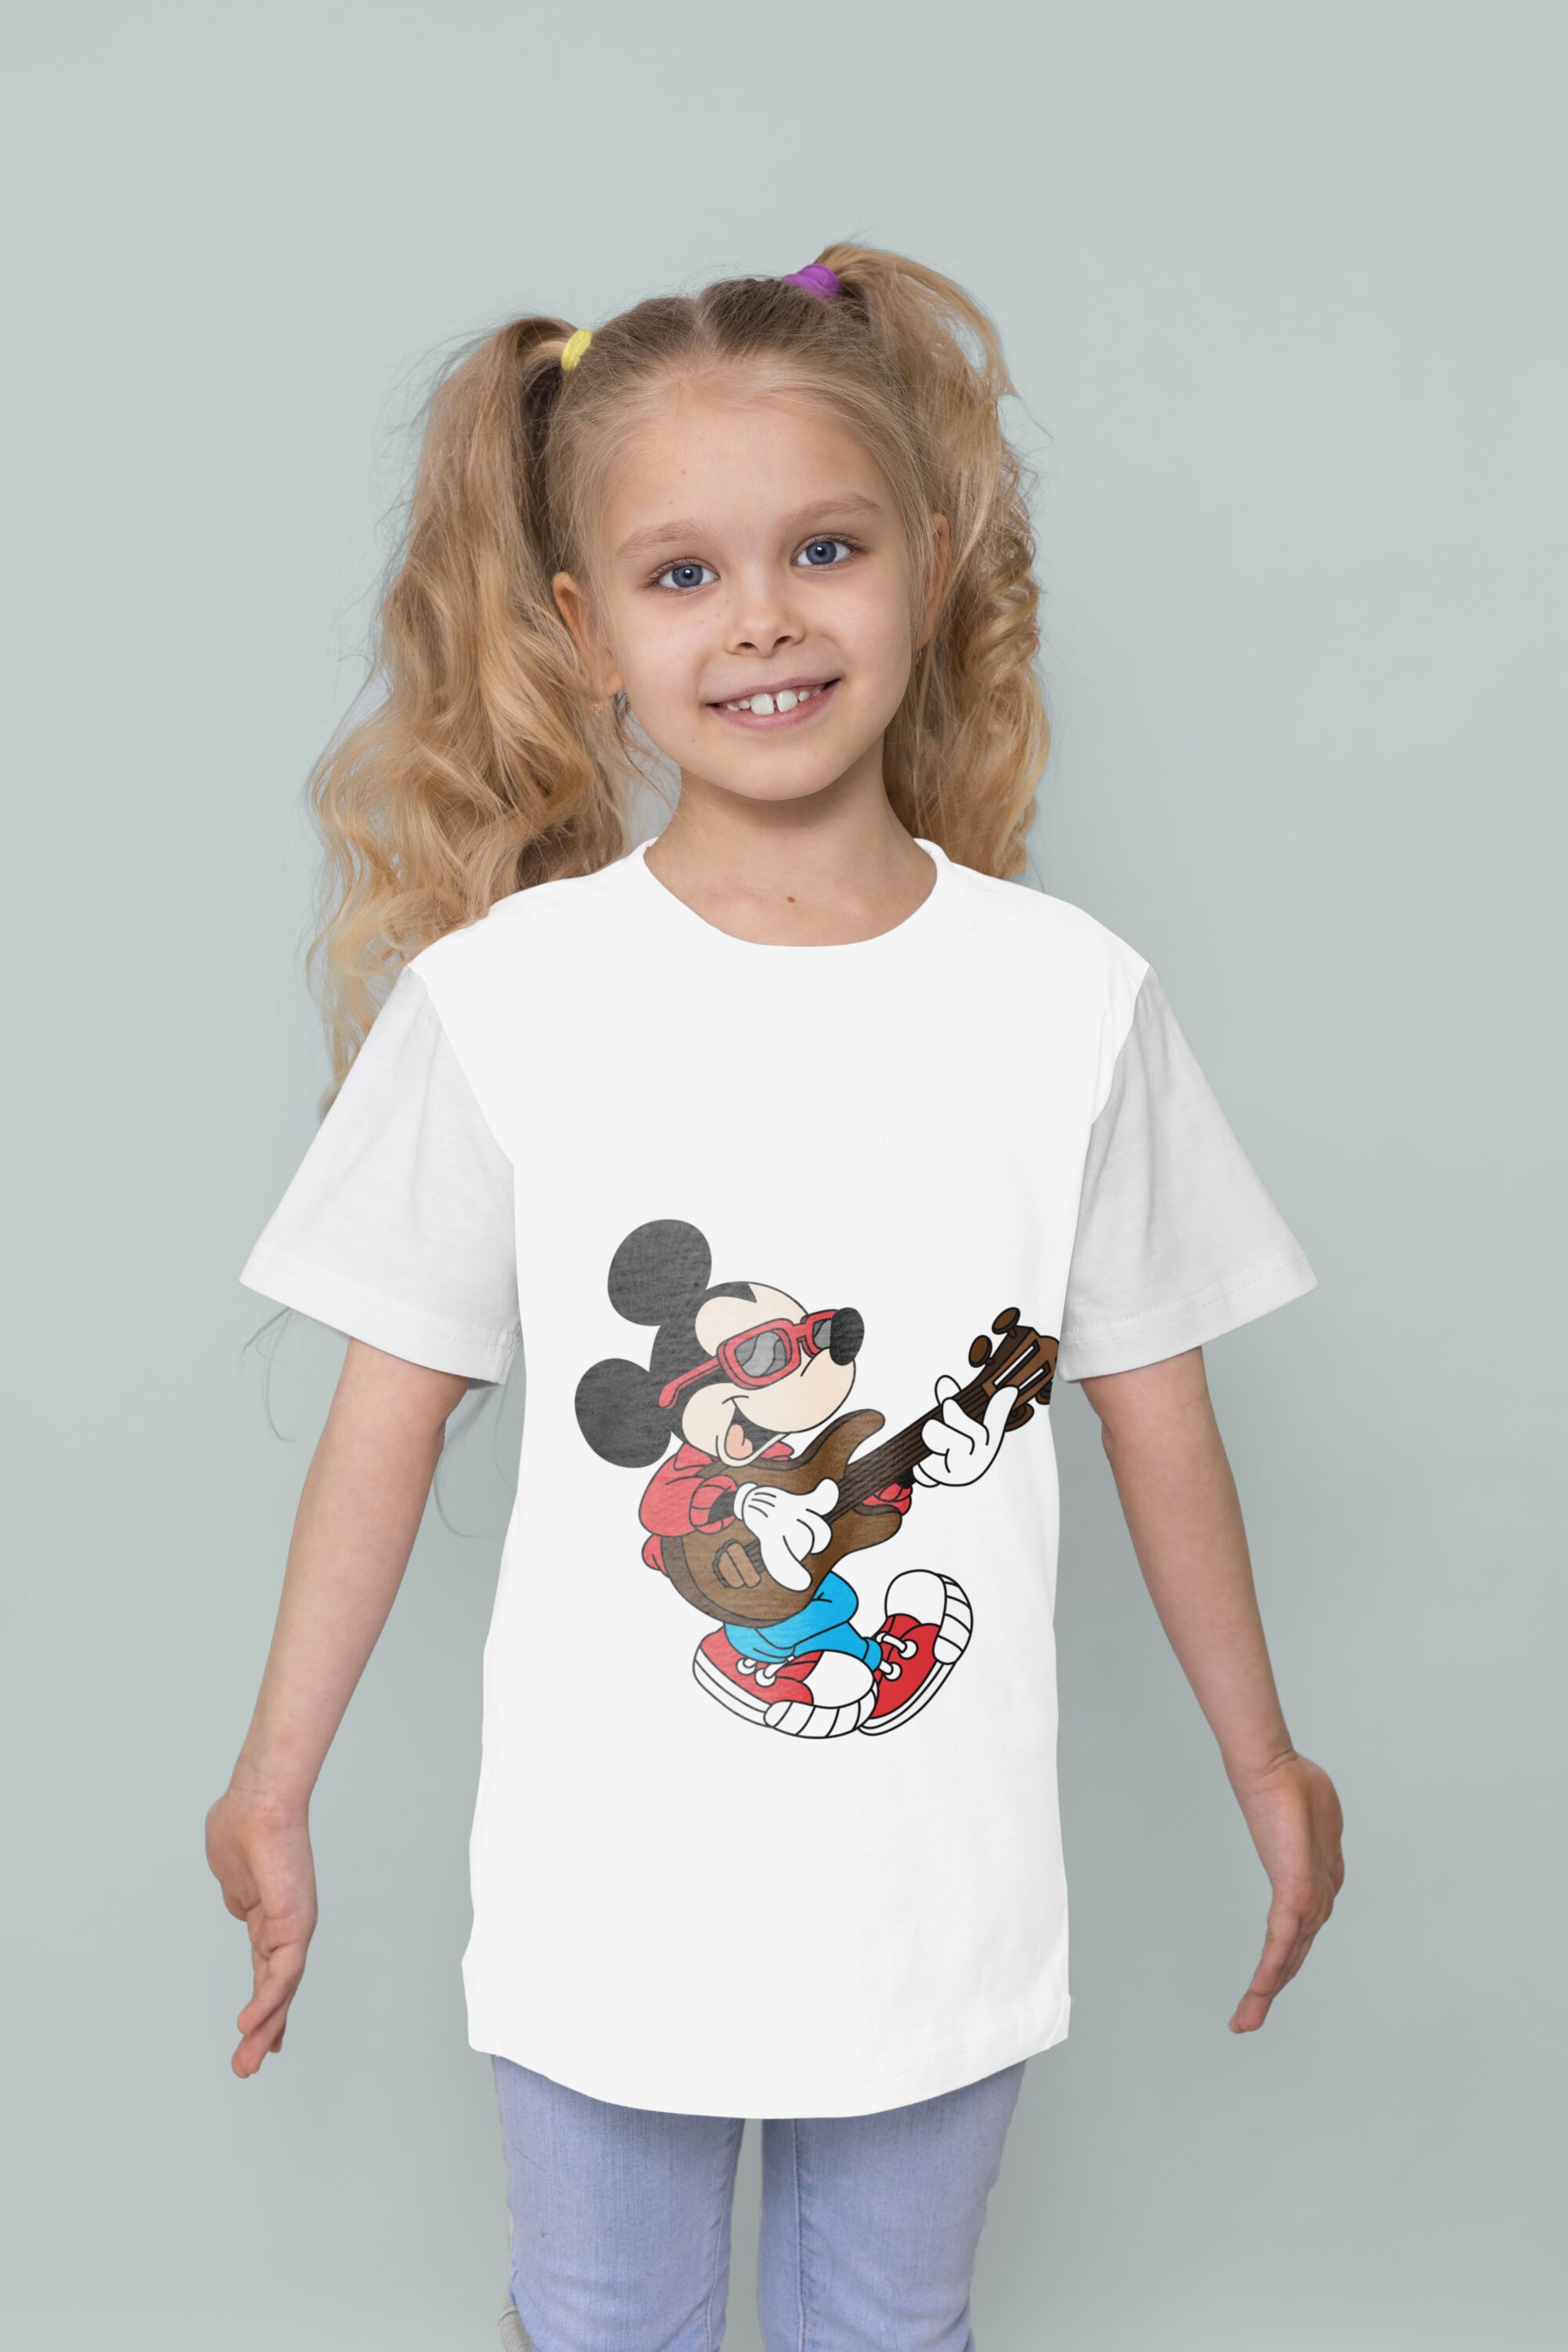 Disney mickey mouse style.